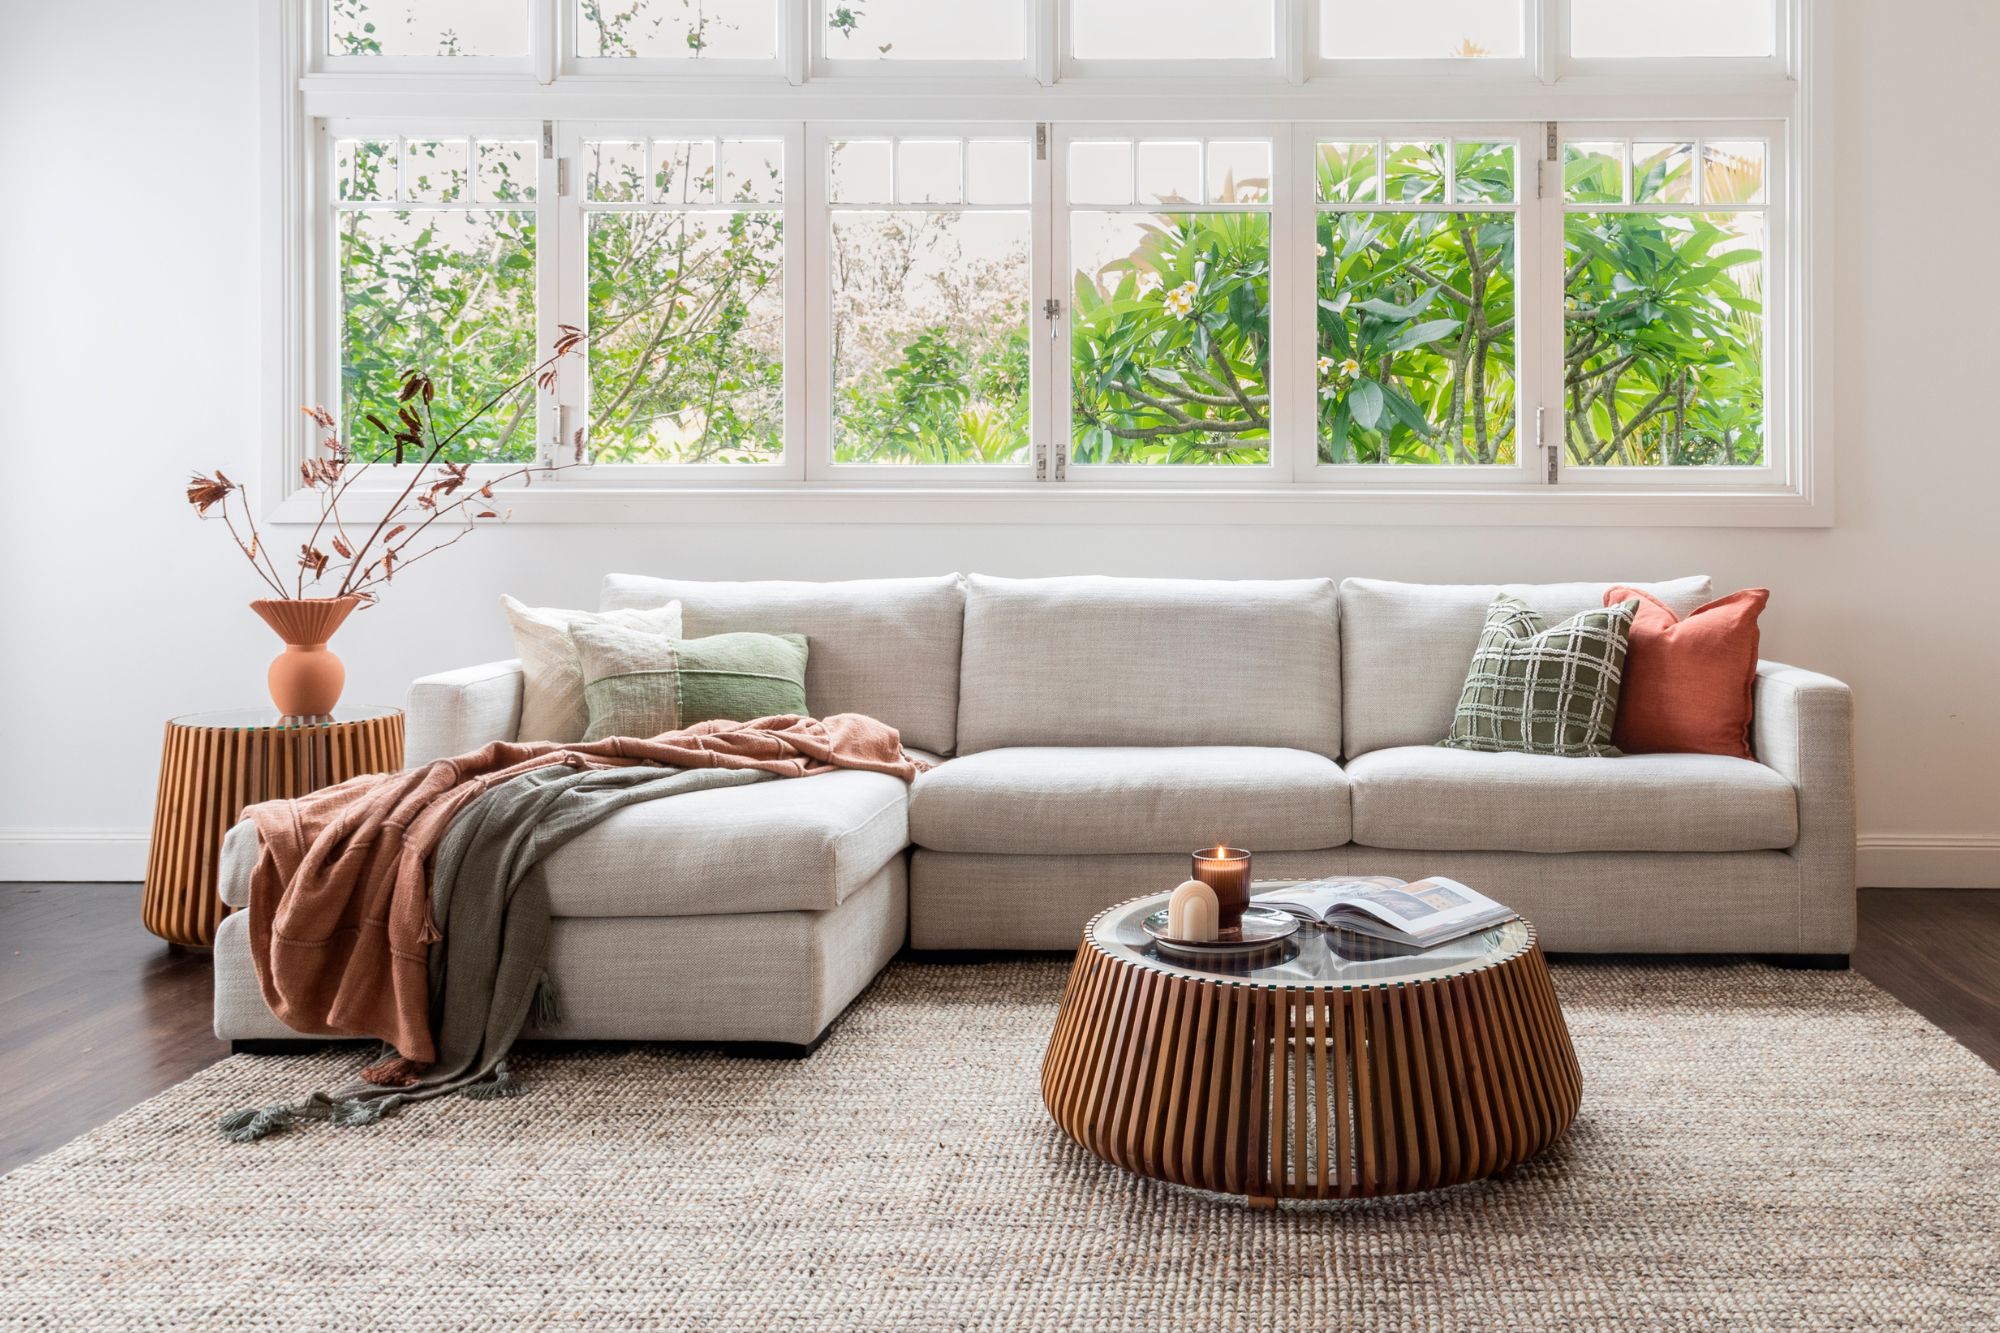 Sofa buying guide - common mistakes